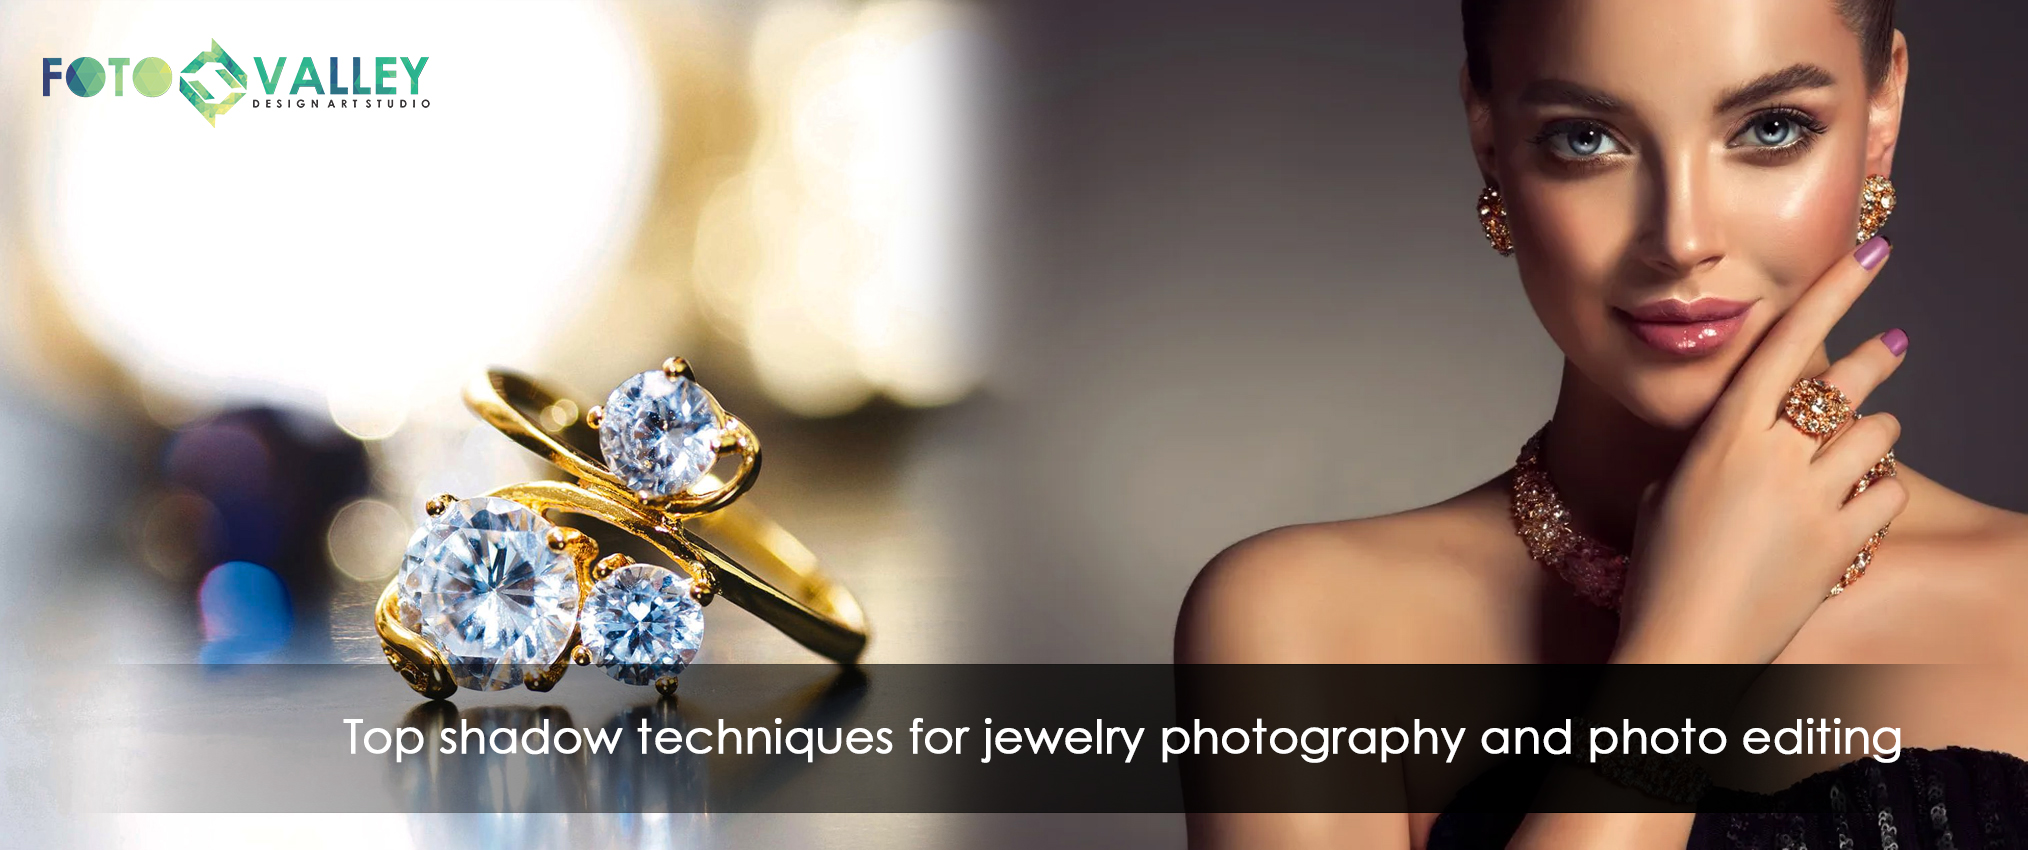 Top shadow techniques for jewelry photography and photo editing